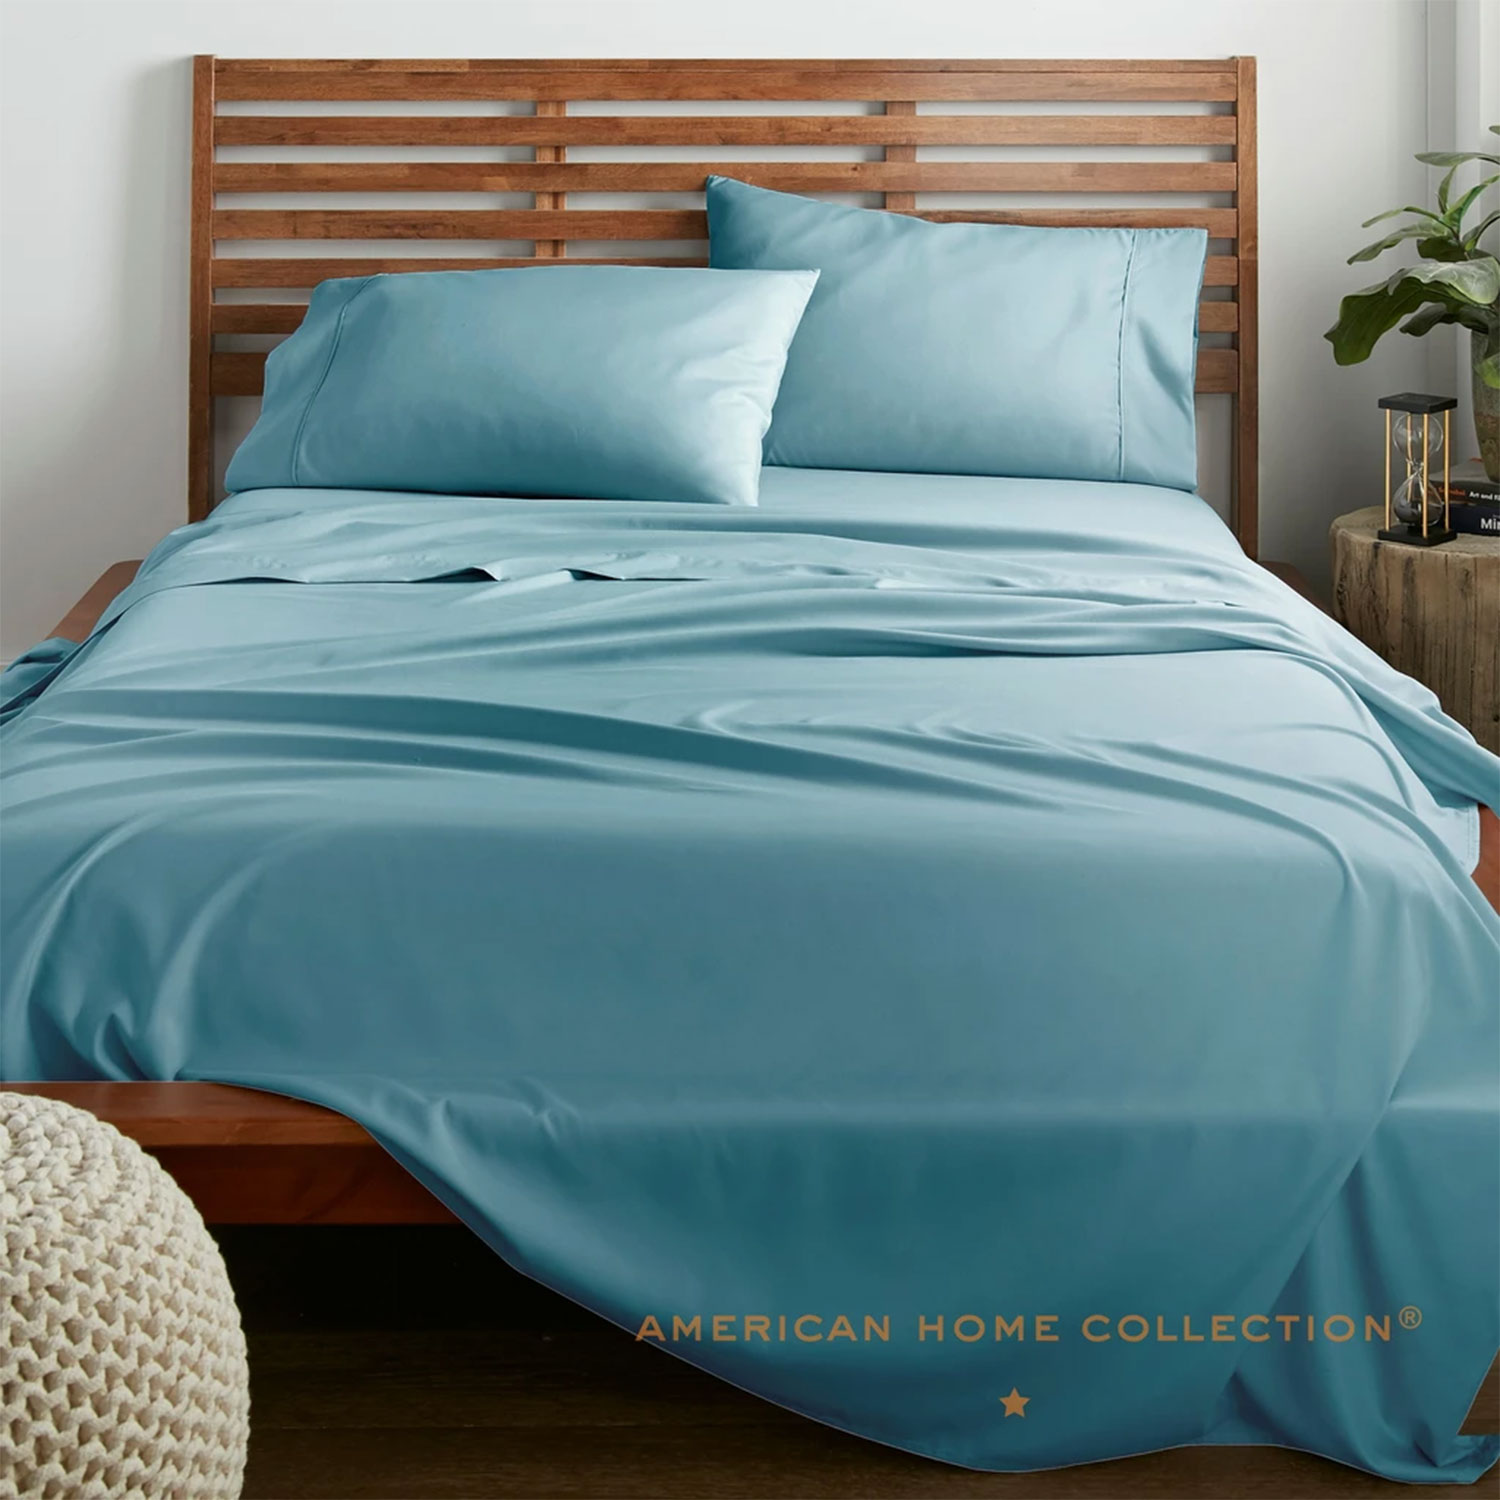 Ultra Soft 4 Piece Microfiber Bedding Sheets And Pillowcases Set-American Home Collection 